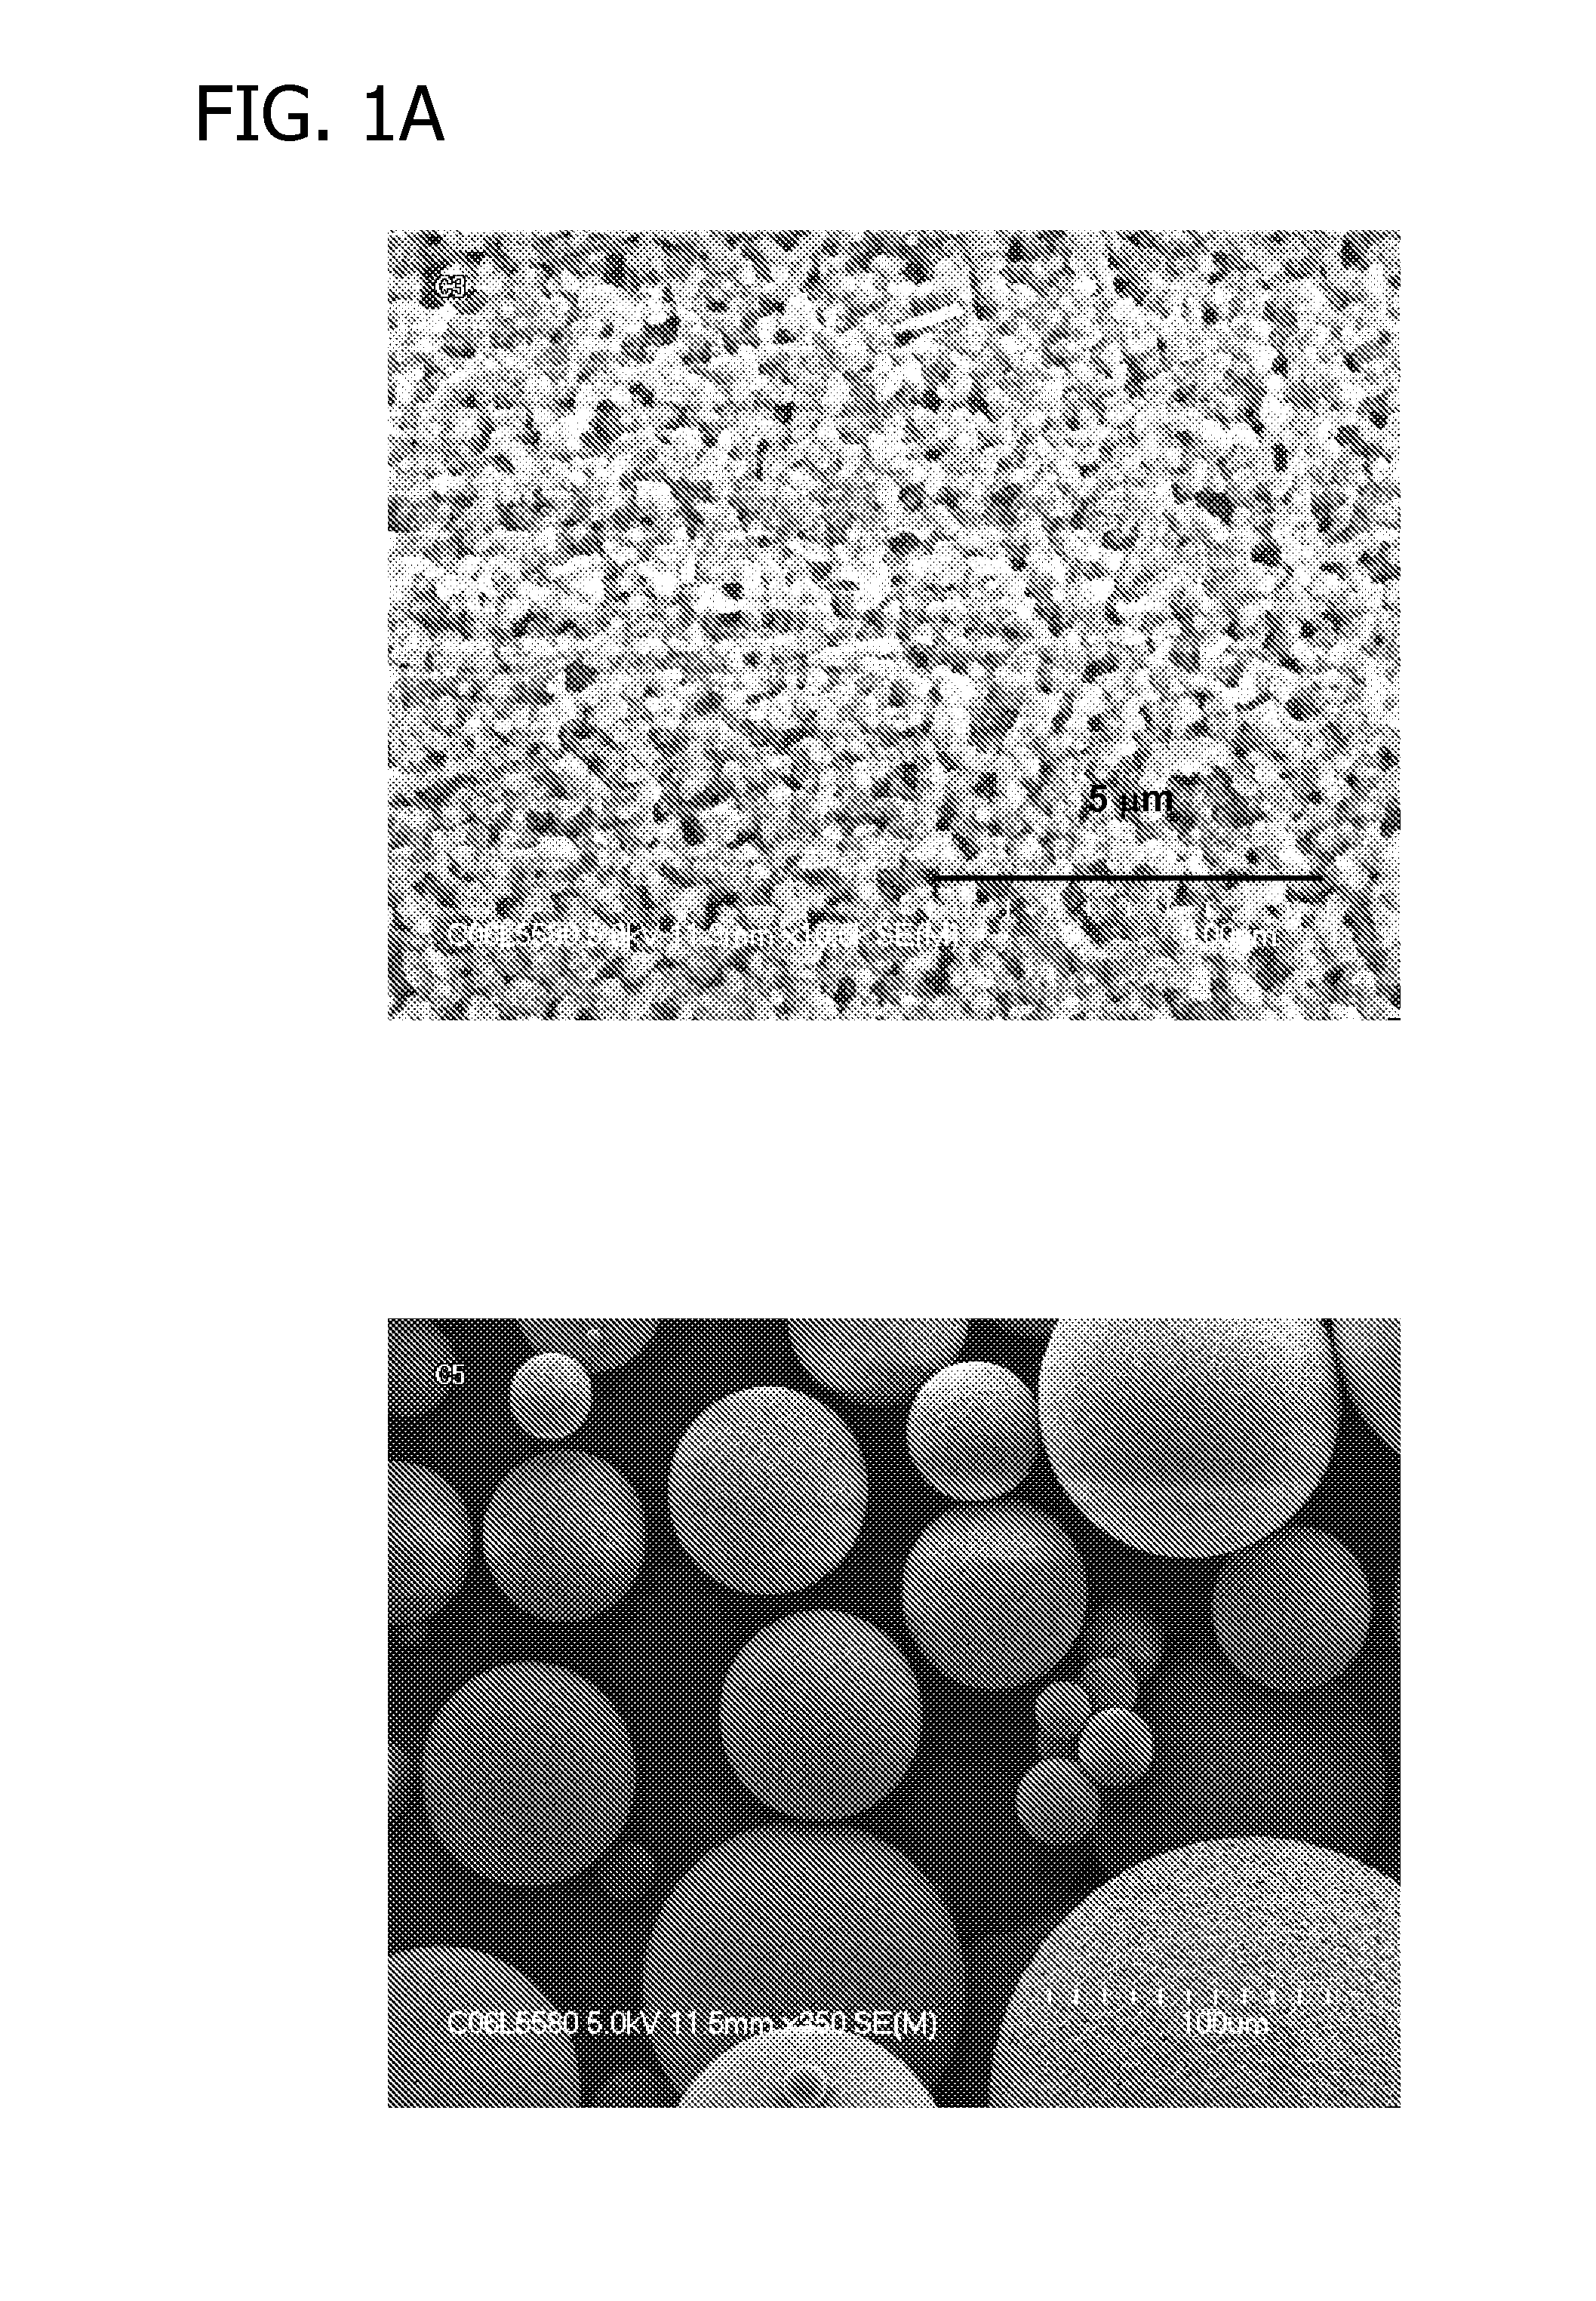 Crosslinked cation exchange polymers, compositions and use in treating hyperkalemia